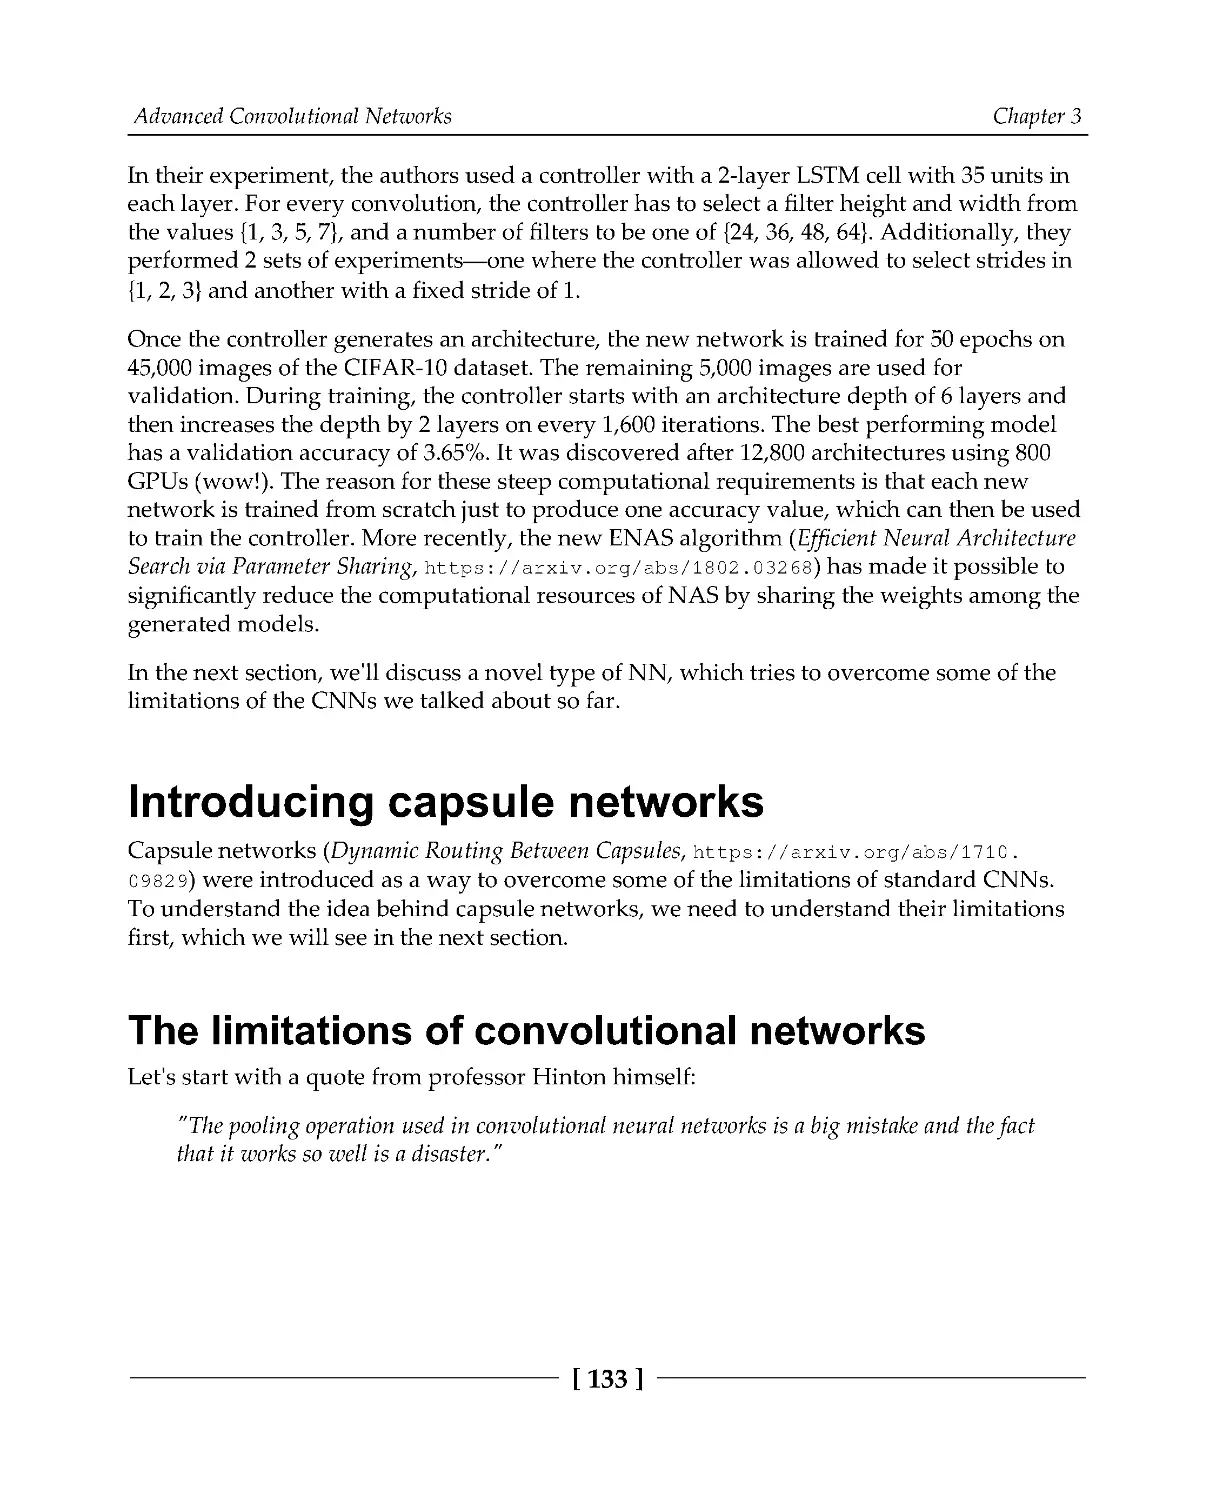 Introducing capsule networks